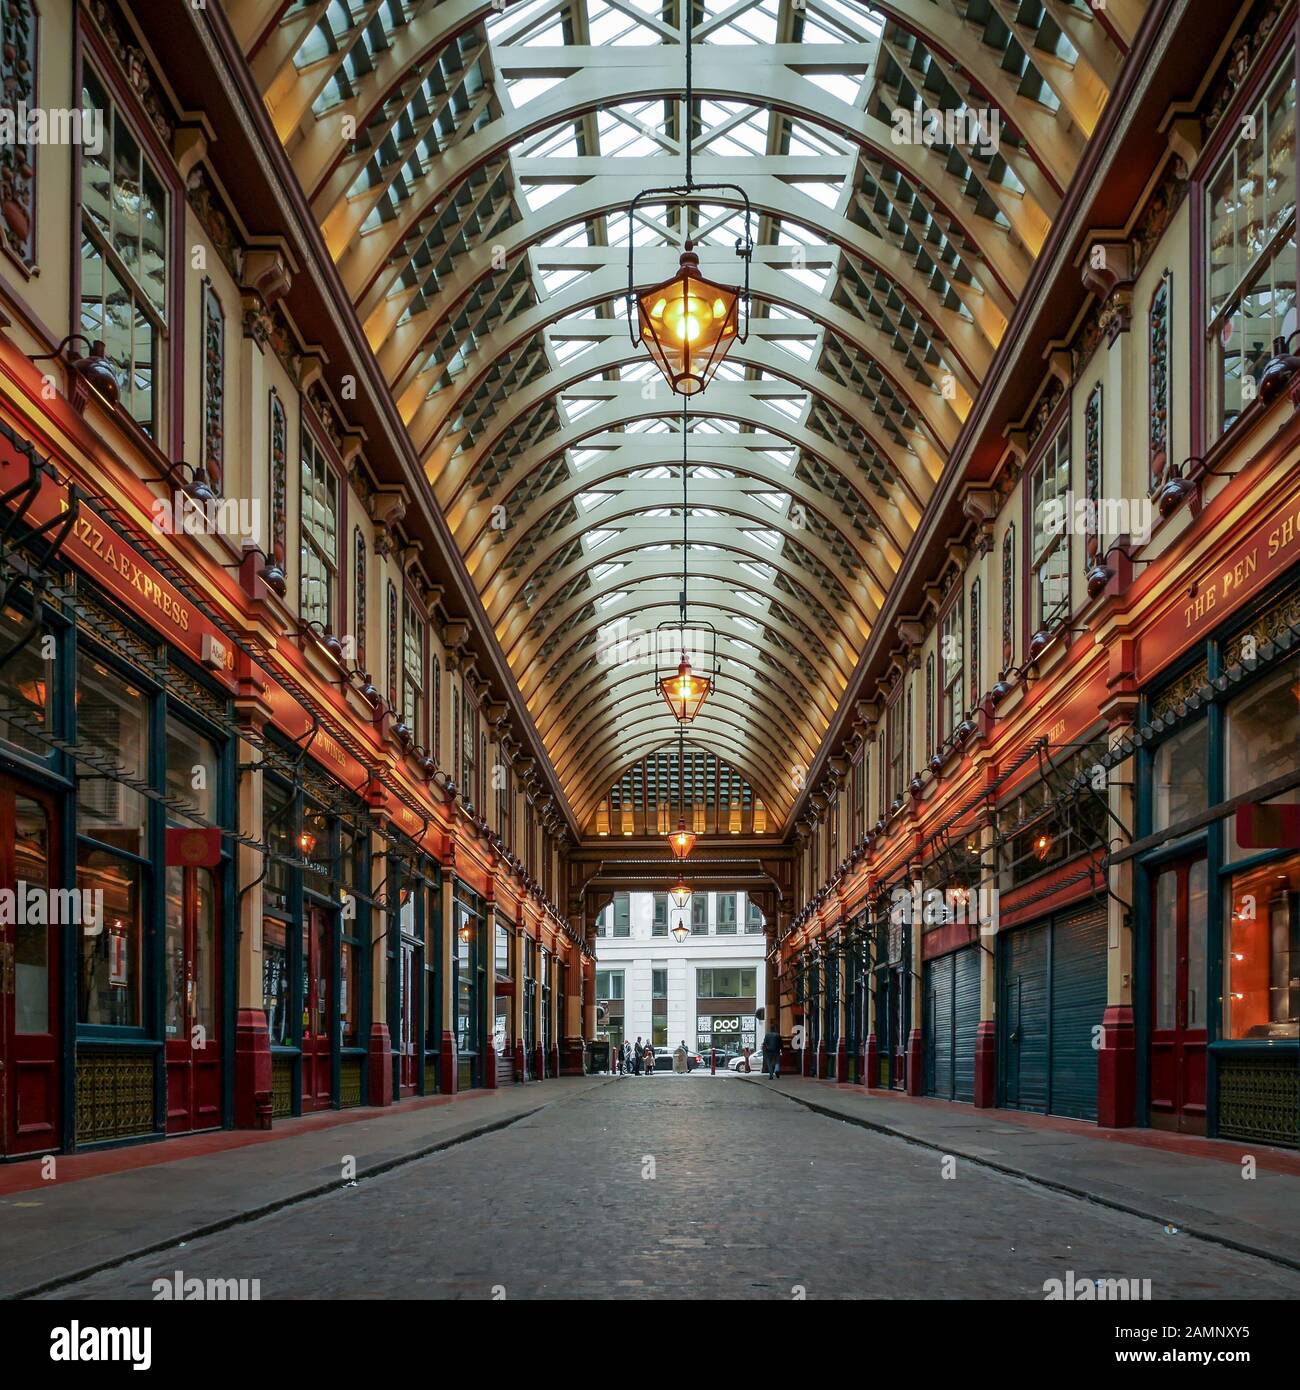 Leadenhall Market, London. Originally a poultry market, the landmark location now houses bars and restaurants in the affluent financial district. Stock Photo